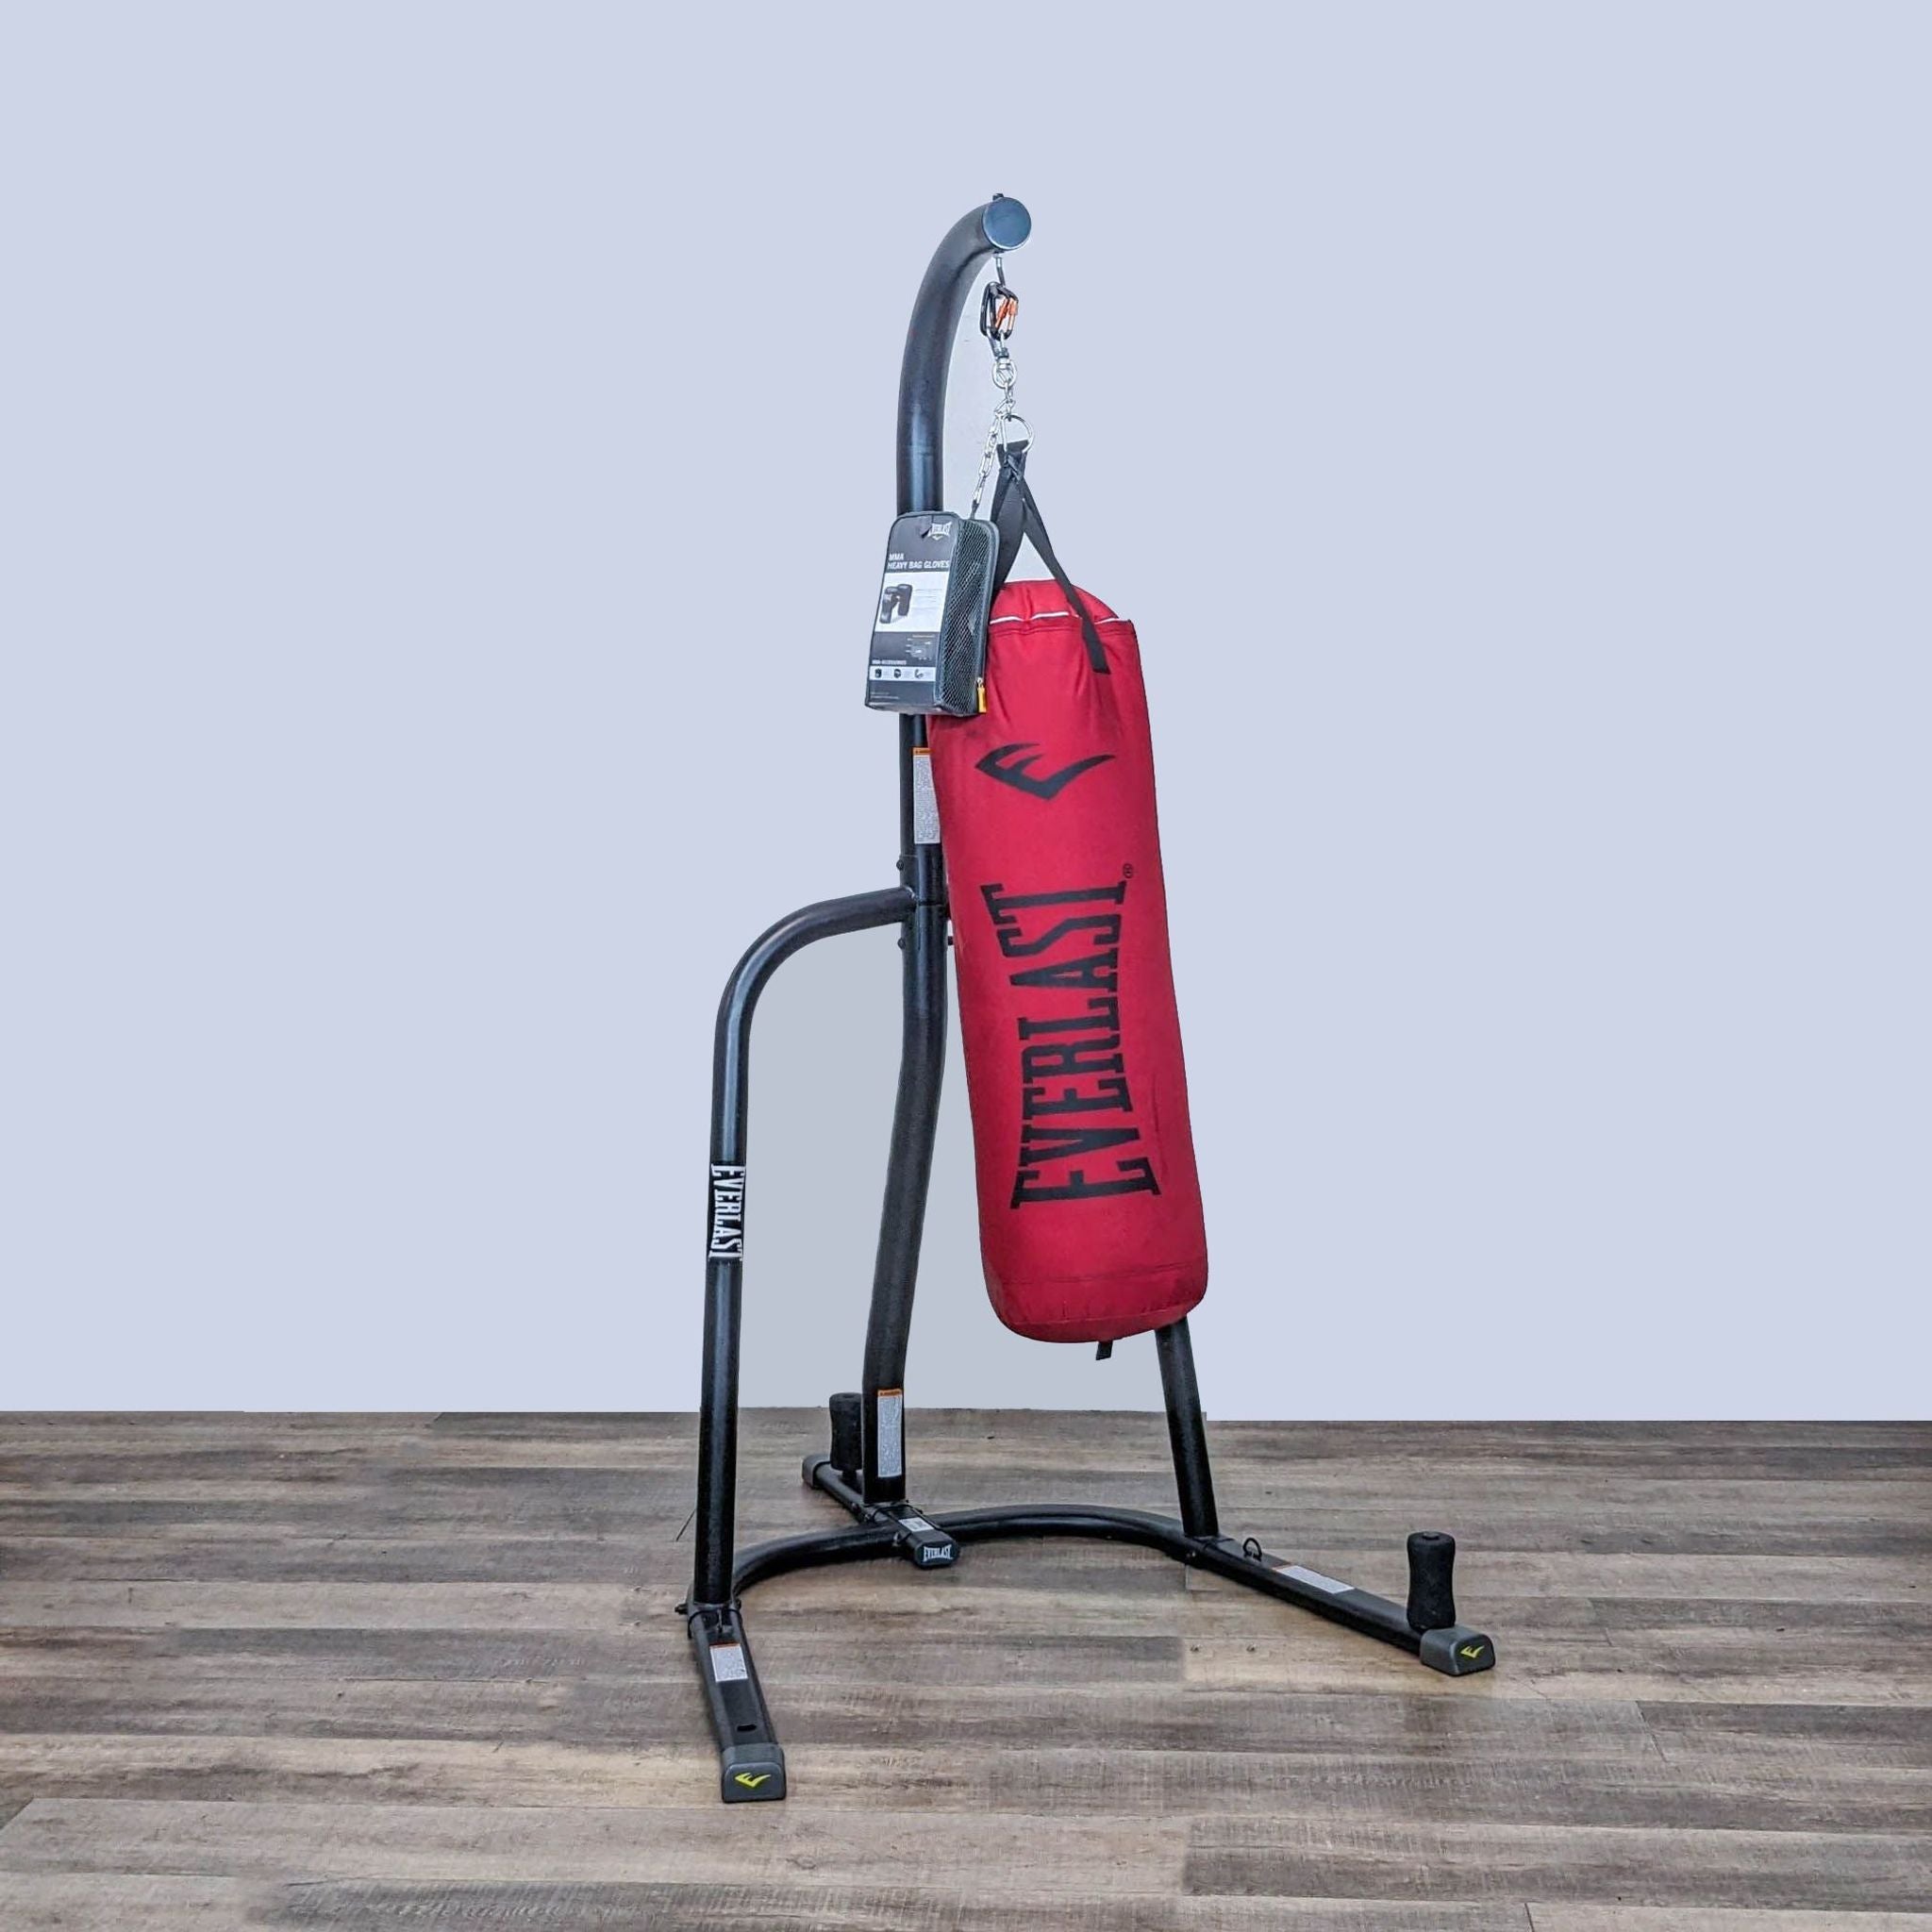 Everlast gym gear featuring a sturdy red punching bag on a free-standing black frame, suitable for improving strength and agility.